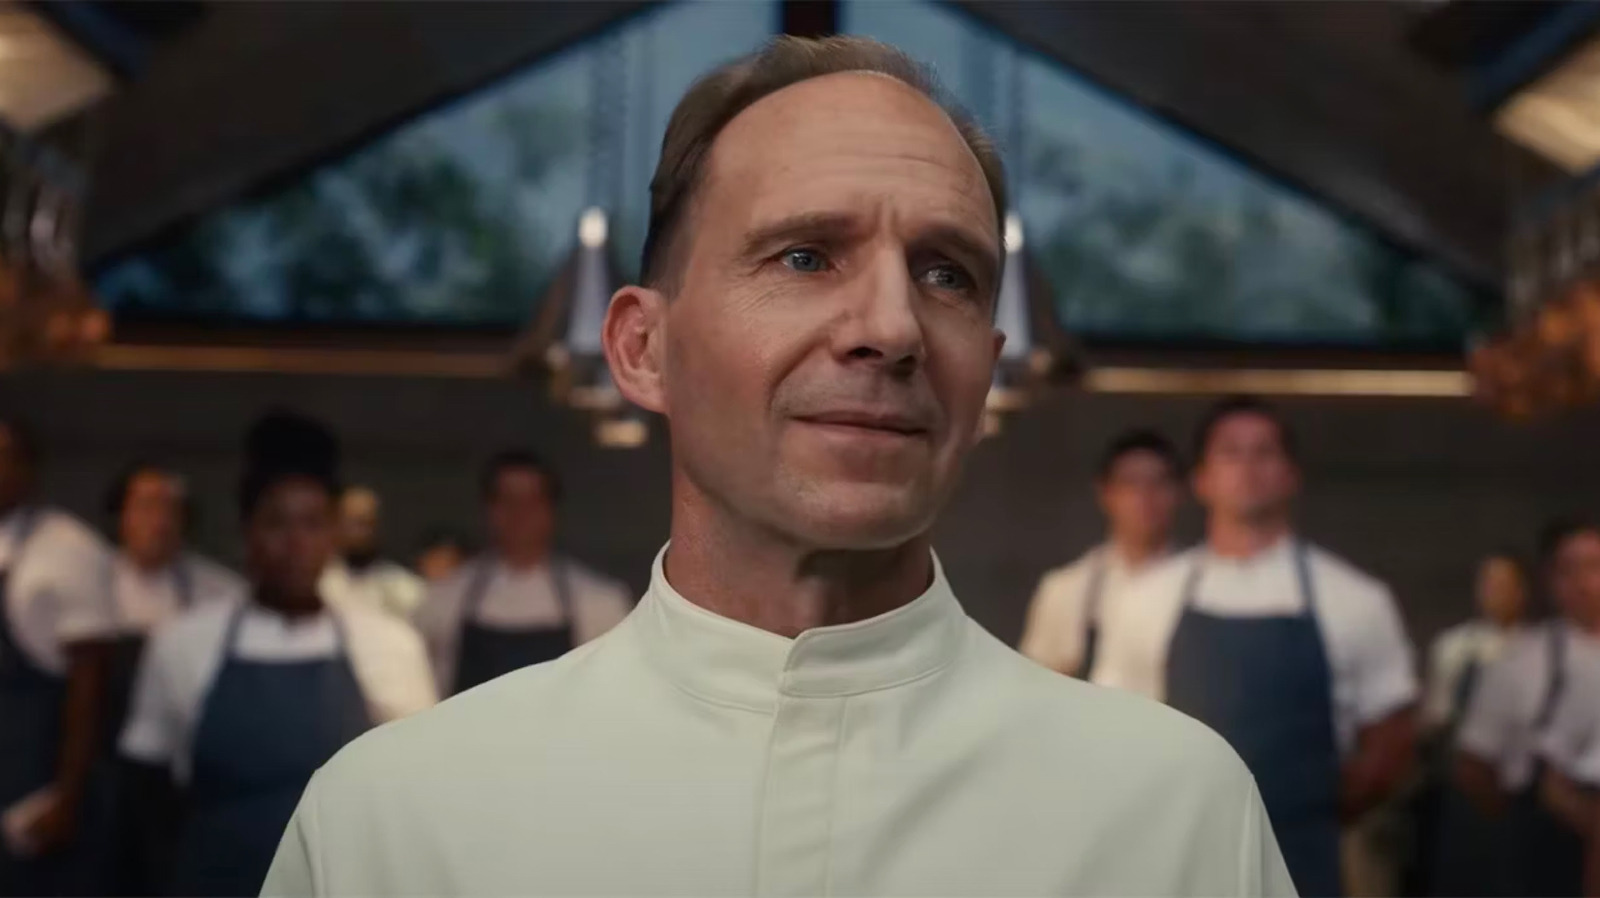 Review: “The Menu” Serves Ralph Fiennes in a Terrifying, True-to